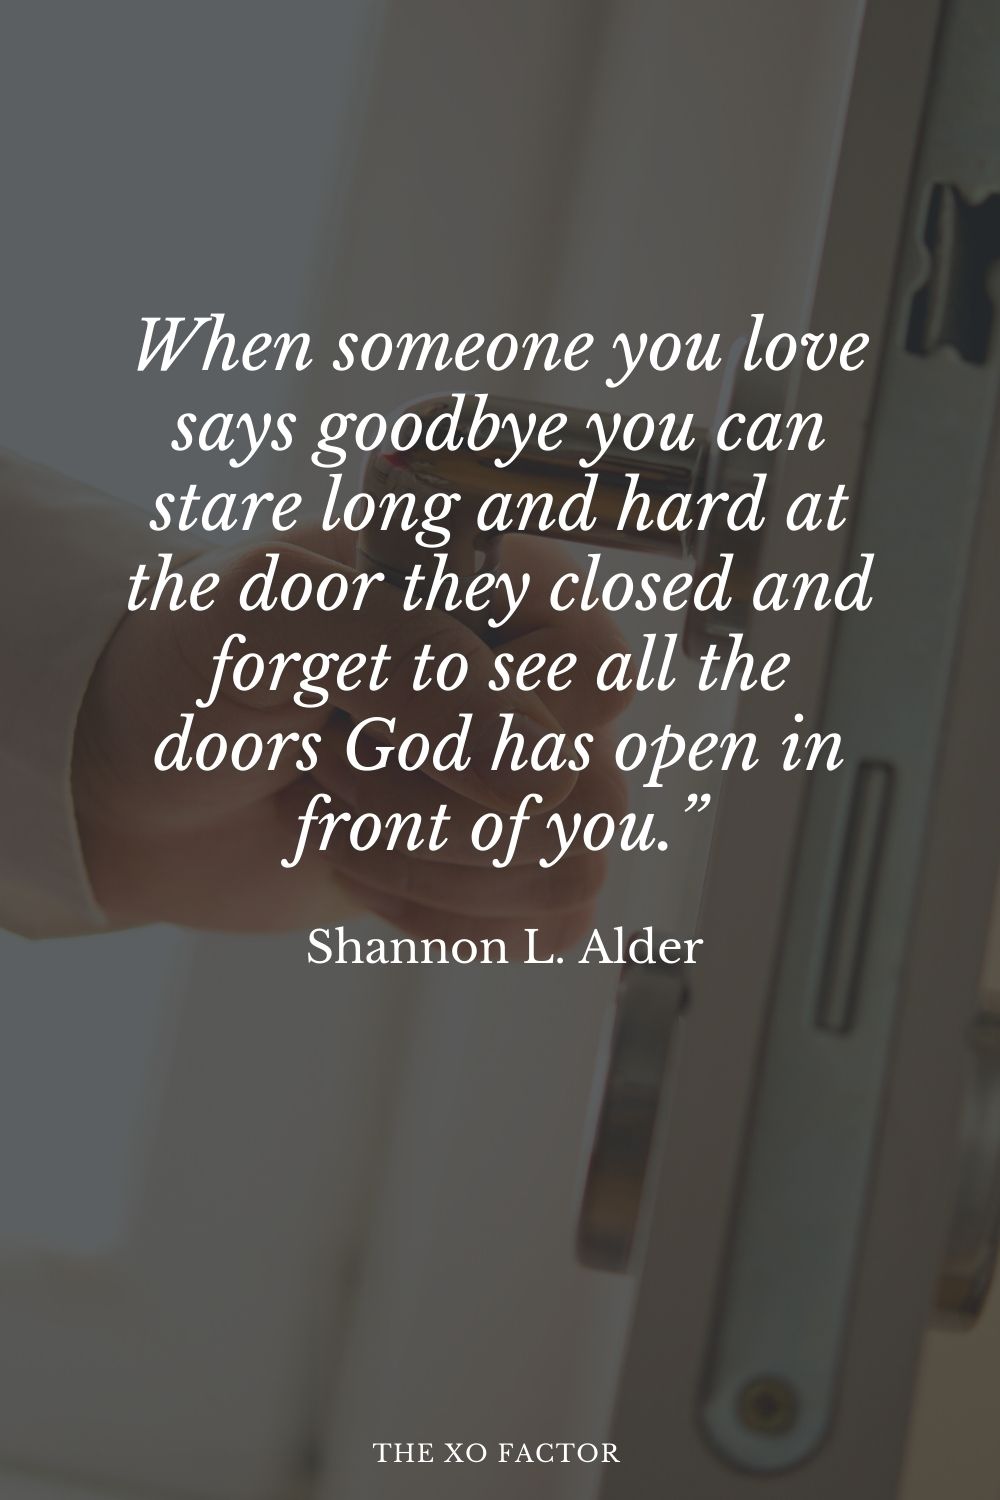 When someone you love says goodbye you can stare long and hard at the door they closed and forget to see all the doors God has open in front of you.” Shannon L. Alder